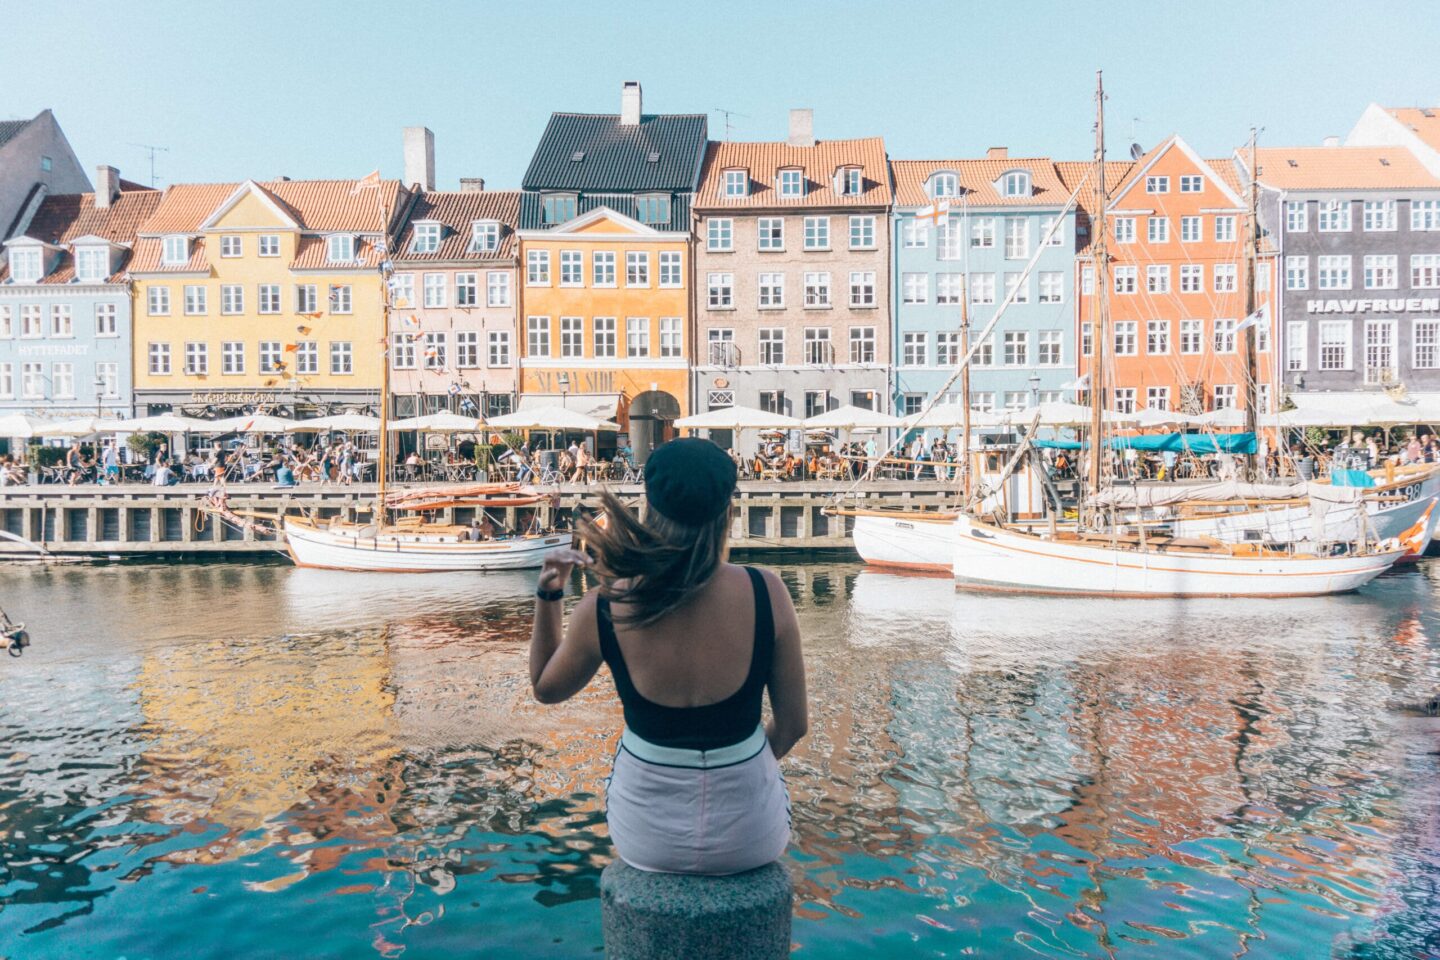 A girl flips her hair in Copenhagen, Denmark, near the colourful houses on the canals. This city is easily one of the Most Romantic Places in Europe